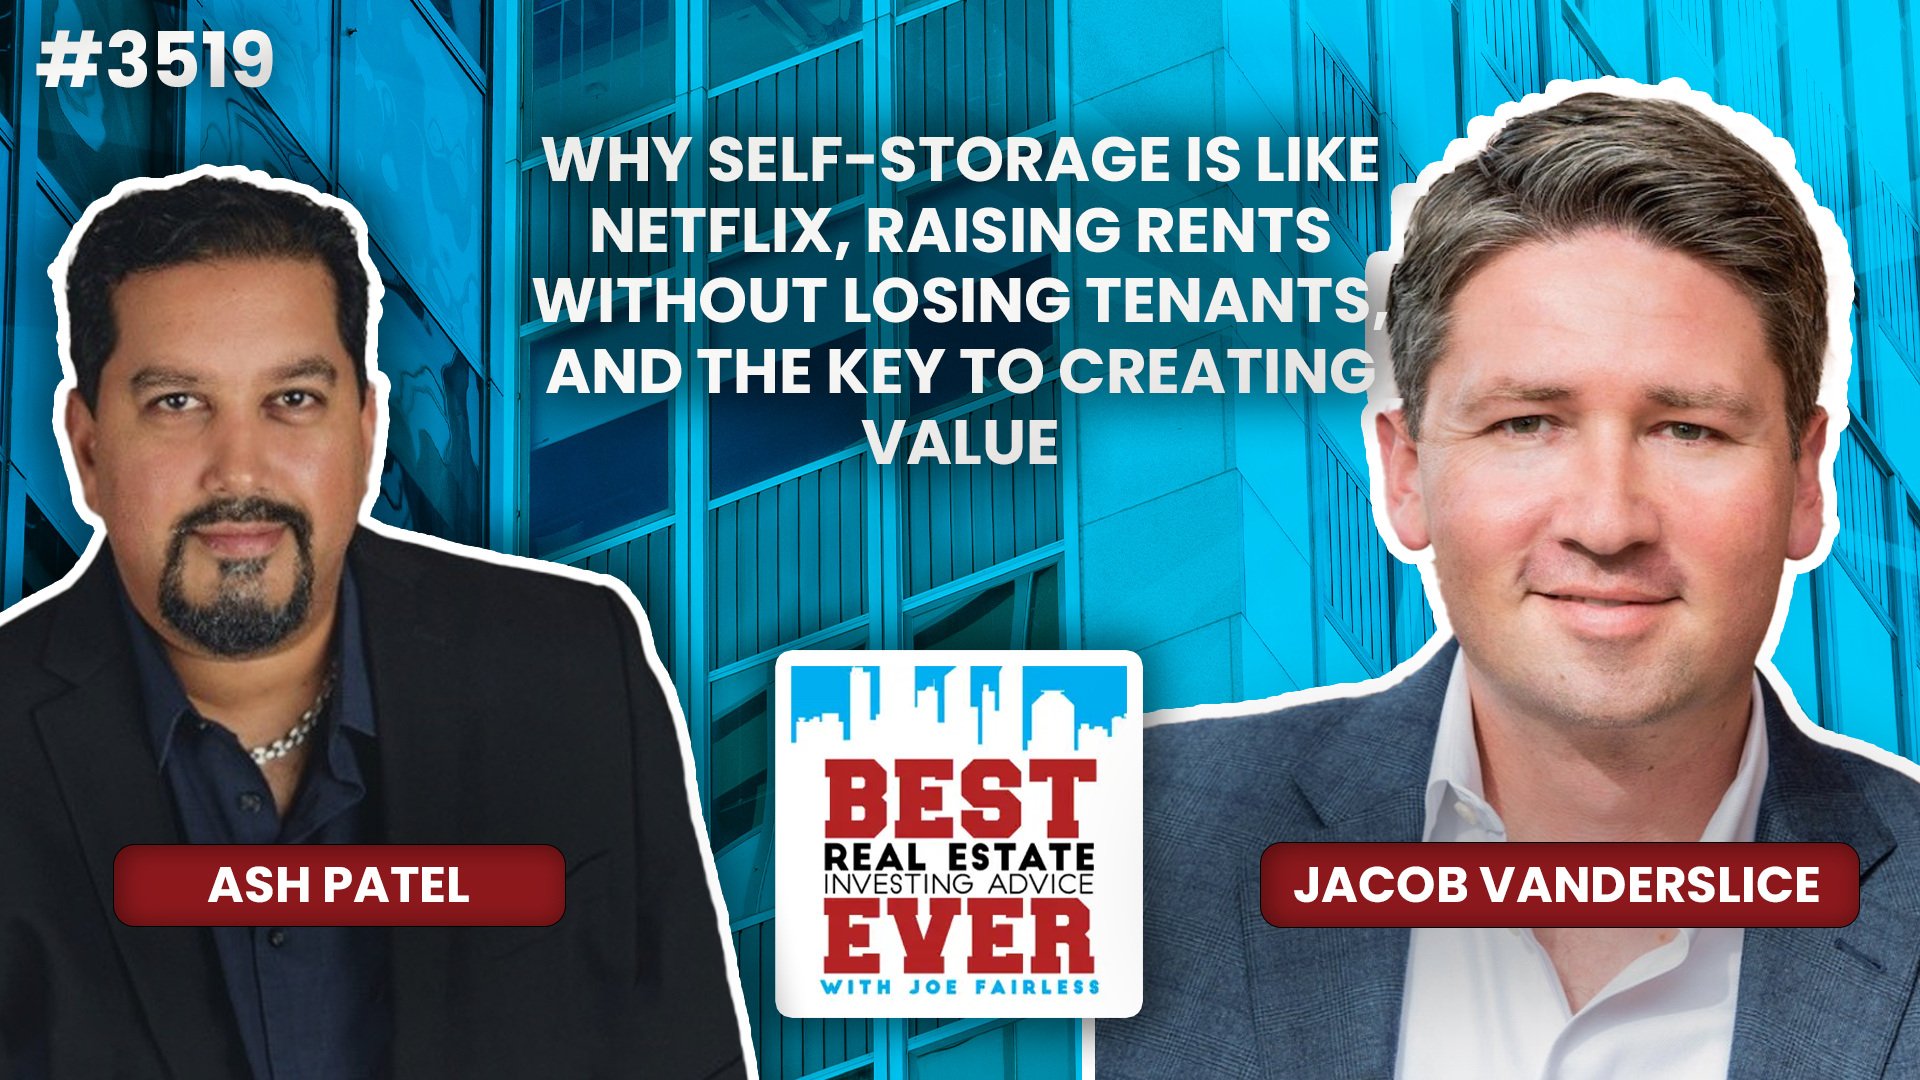 JF3519: Why Self-Storage Is Like Netflix, Raising Rents without Losing Tenants, and the Key to Creating Value ft. Jacob Vanderslice